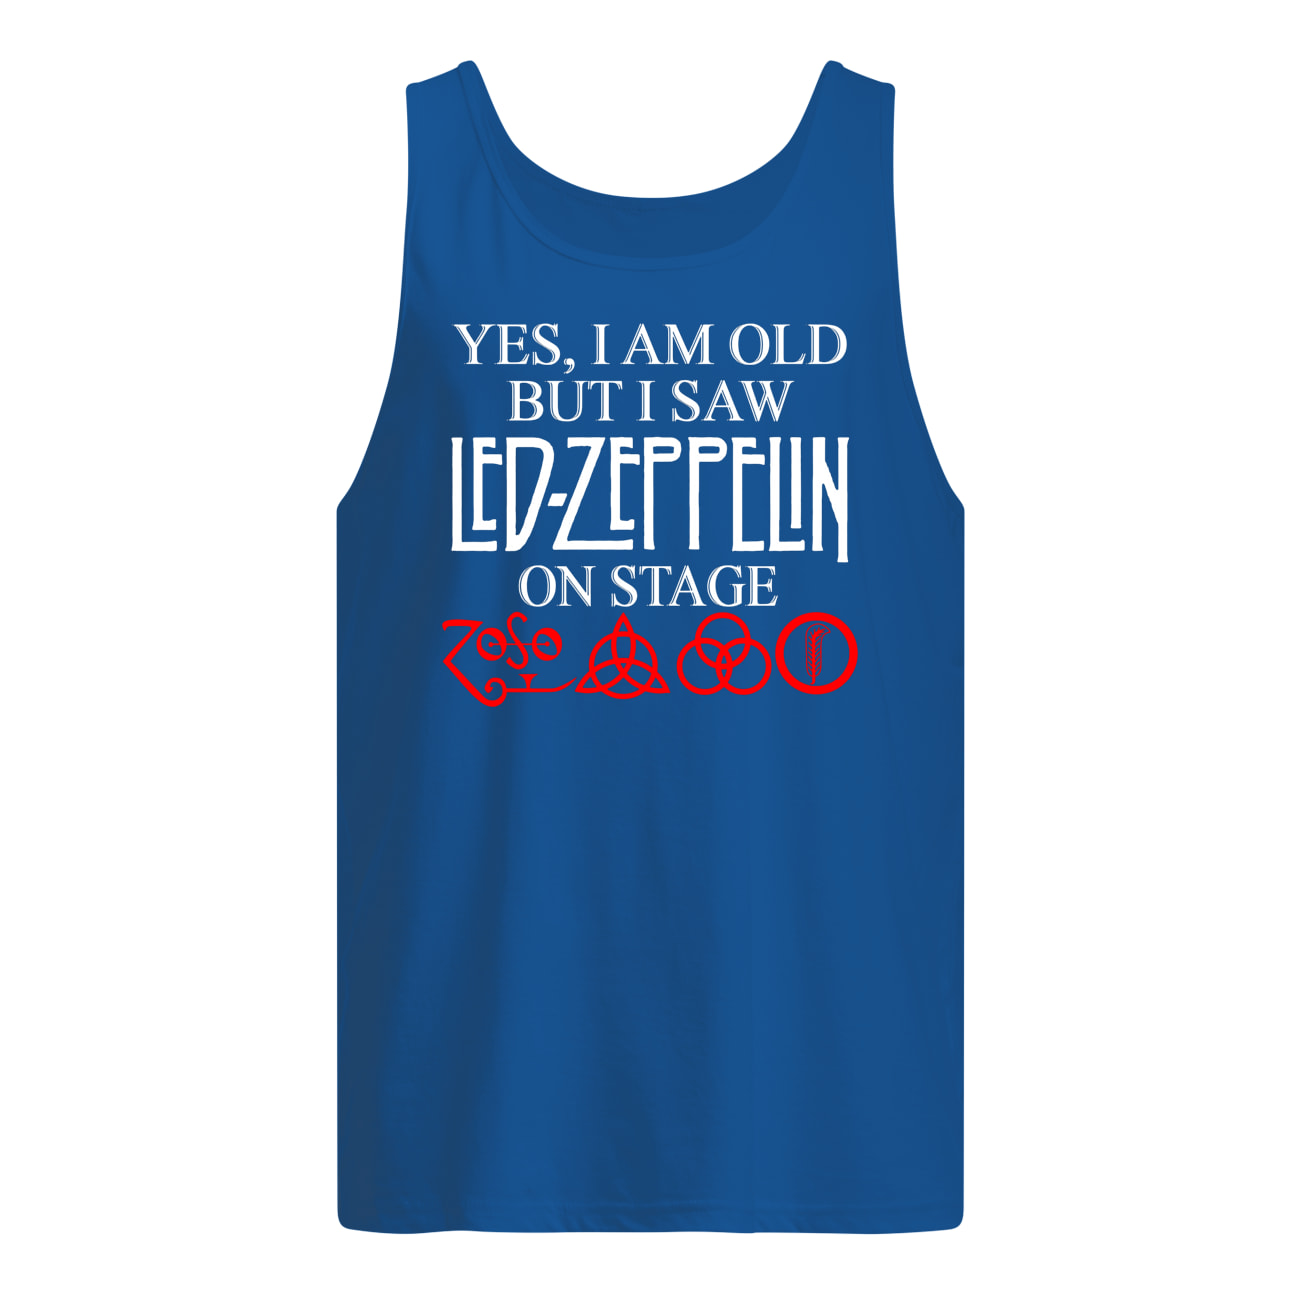 Yes i am old but i saw led-zeppelin on stage tank top